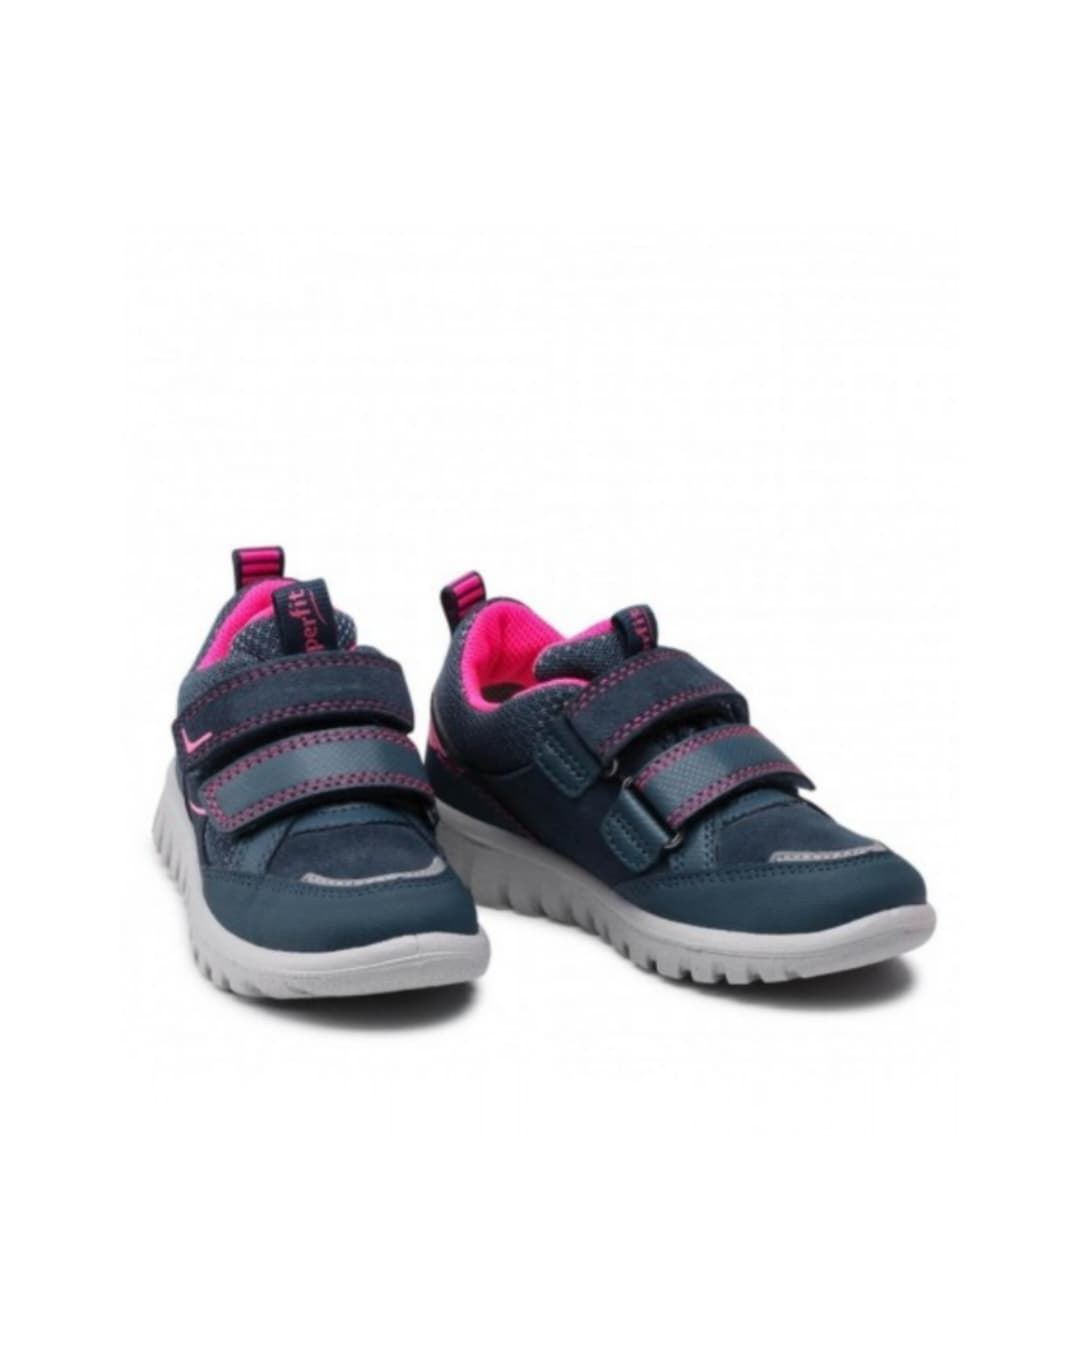 Superfit Girl's Gore-tex Shoes Blue and Pink - Image 3